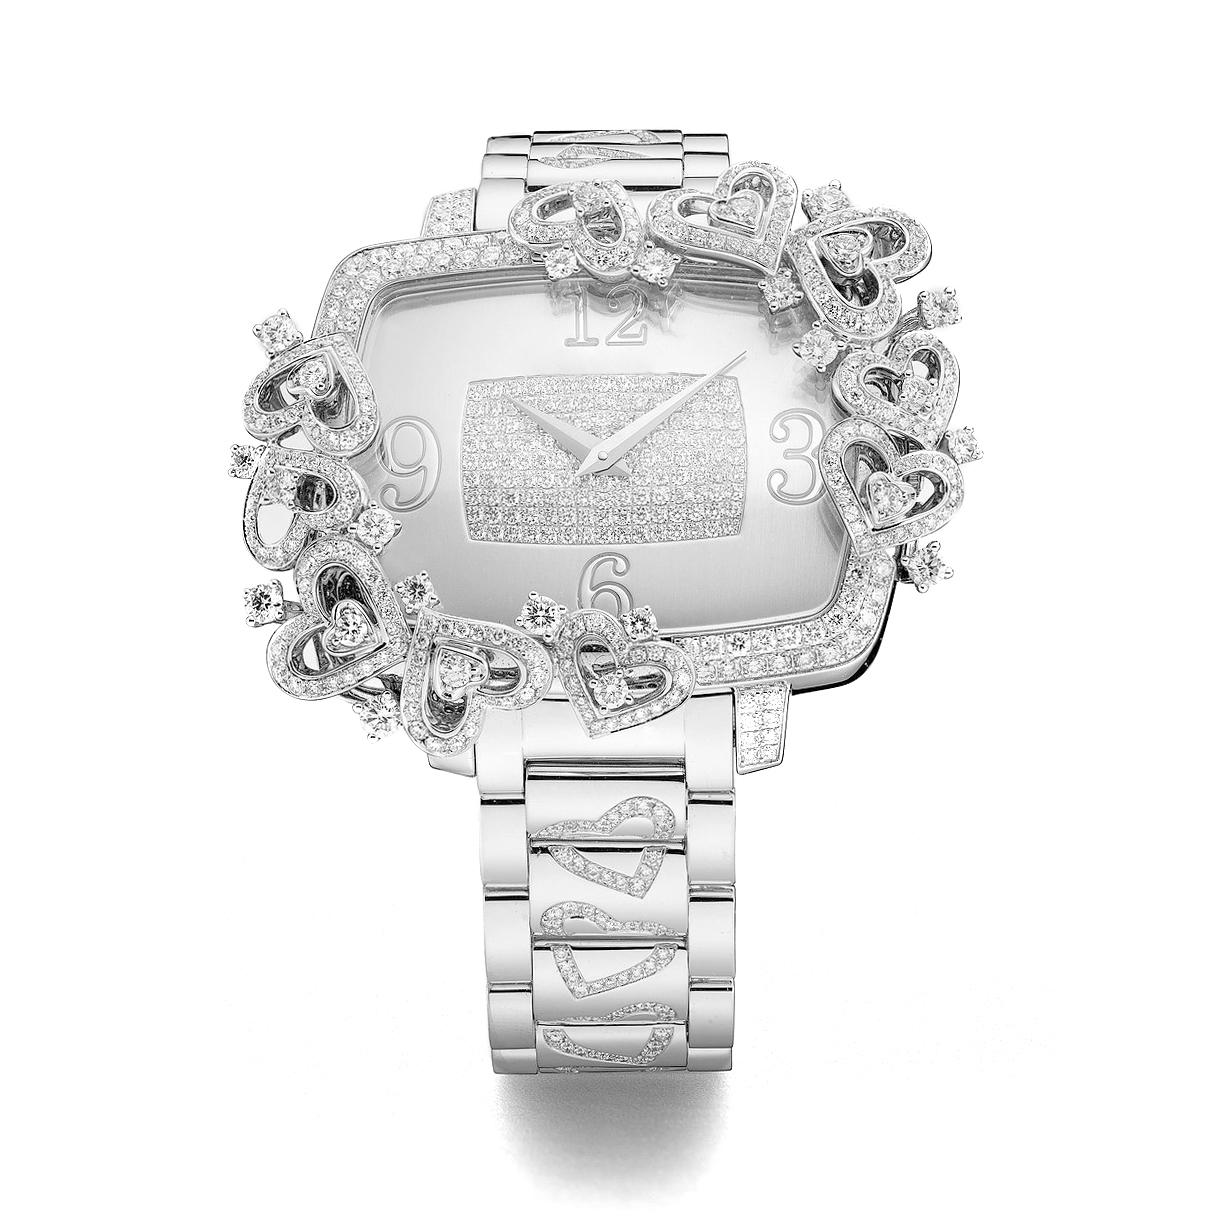 Watch in white gold 18kt set with 728 diamonds 6.87 cts on case dial and bracelet quartz movement.

We do not guarantee the functioning of this watch.